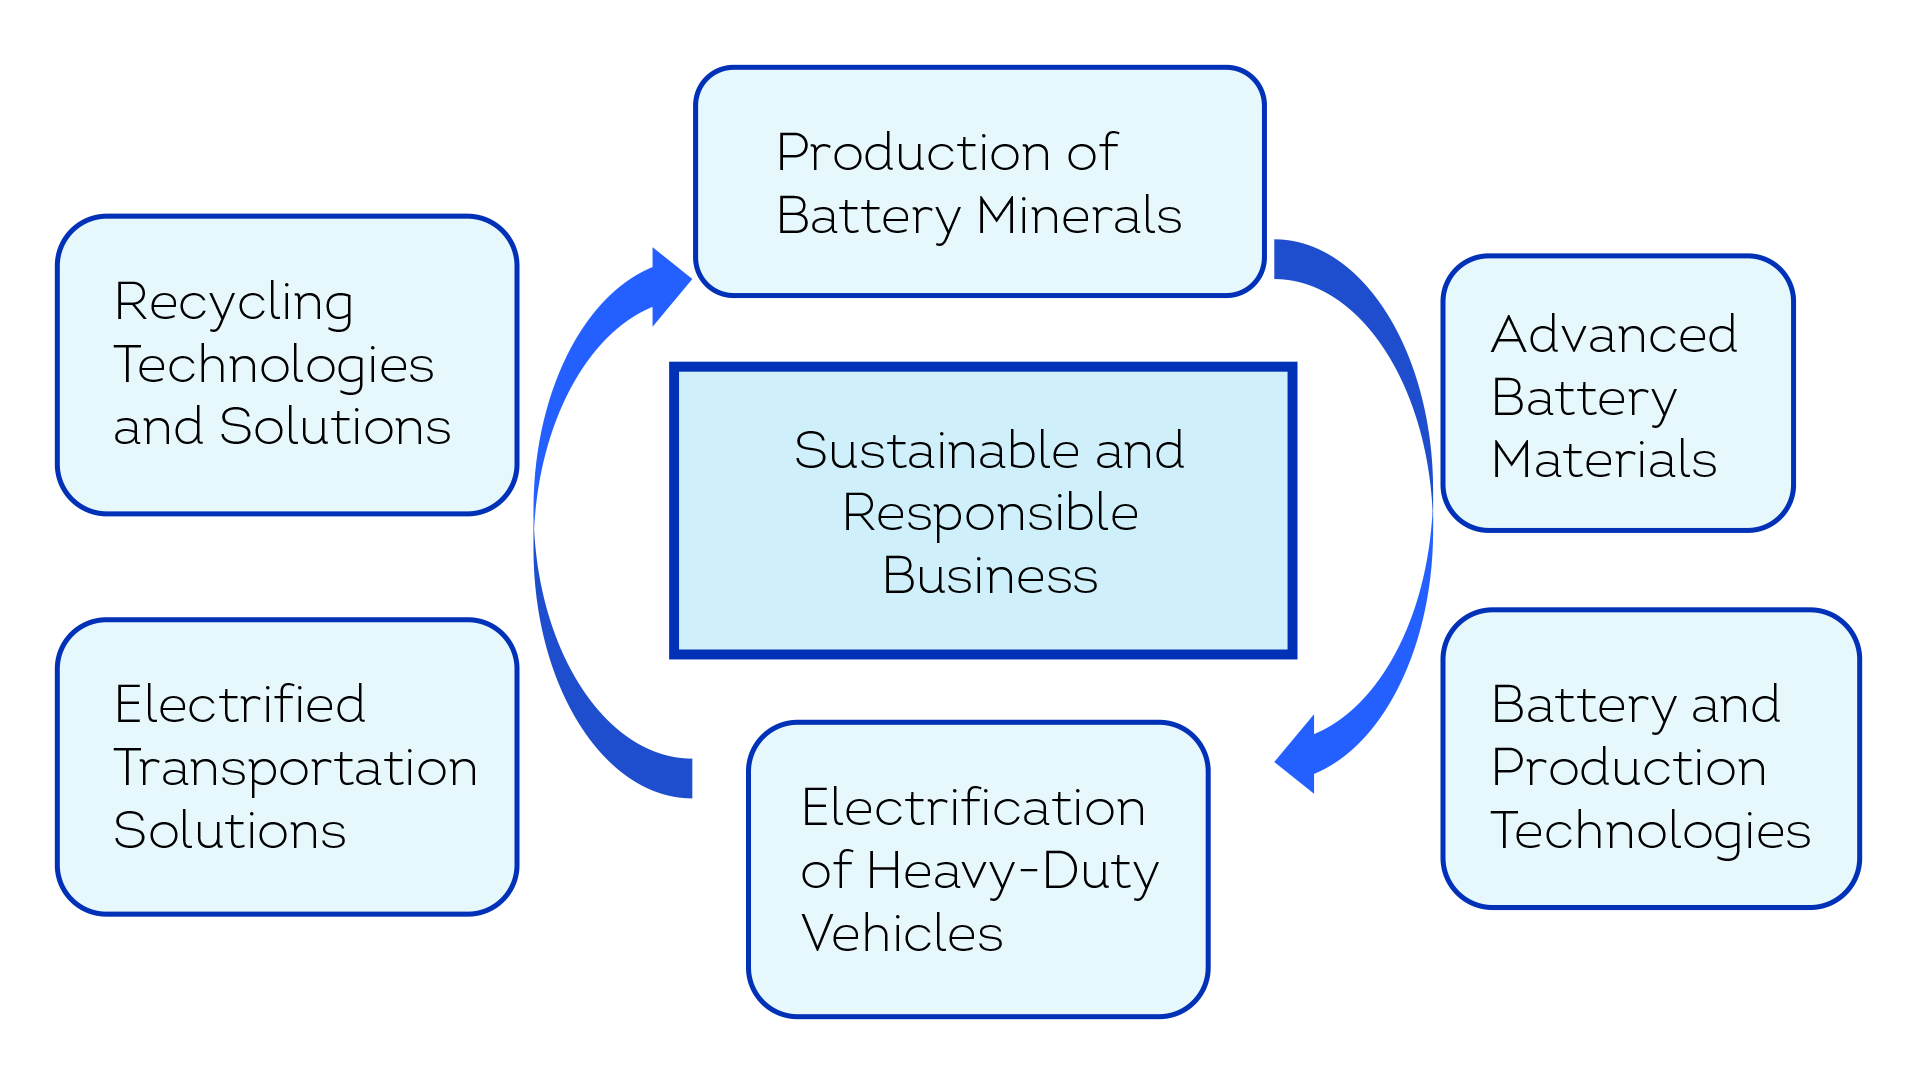 A graph depicting the focus areas in the Finnish battery ecosystem to create sustainable and responsible business: It starts from the Production of Battery Minerals, continues to Advanced Battery Materials, Battery and Production Technologies, Electrification of Heavy-Duty Vehicles, and Electrified Transportation Solutions, and reaches Recycling Technologies and Solutions, finally circulating back to Production of Battery Minerals.